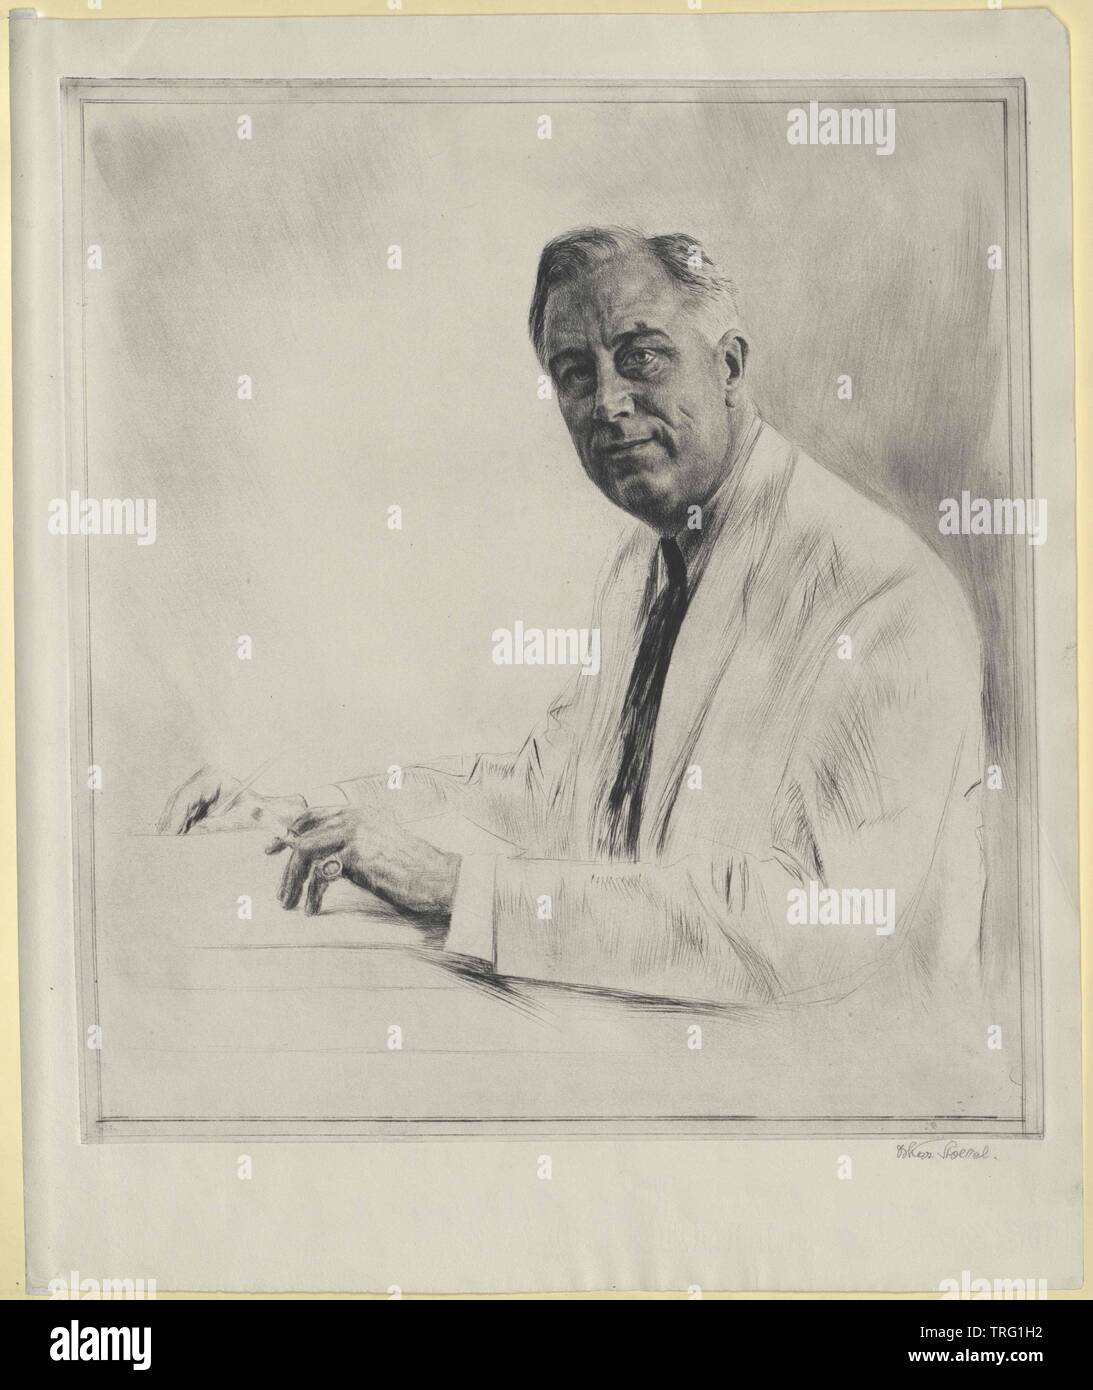 Roosevelt, Franklin Delano, Additional-Rights-Clearance-Info-Not-Available Stock Photo